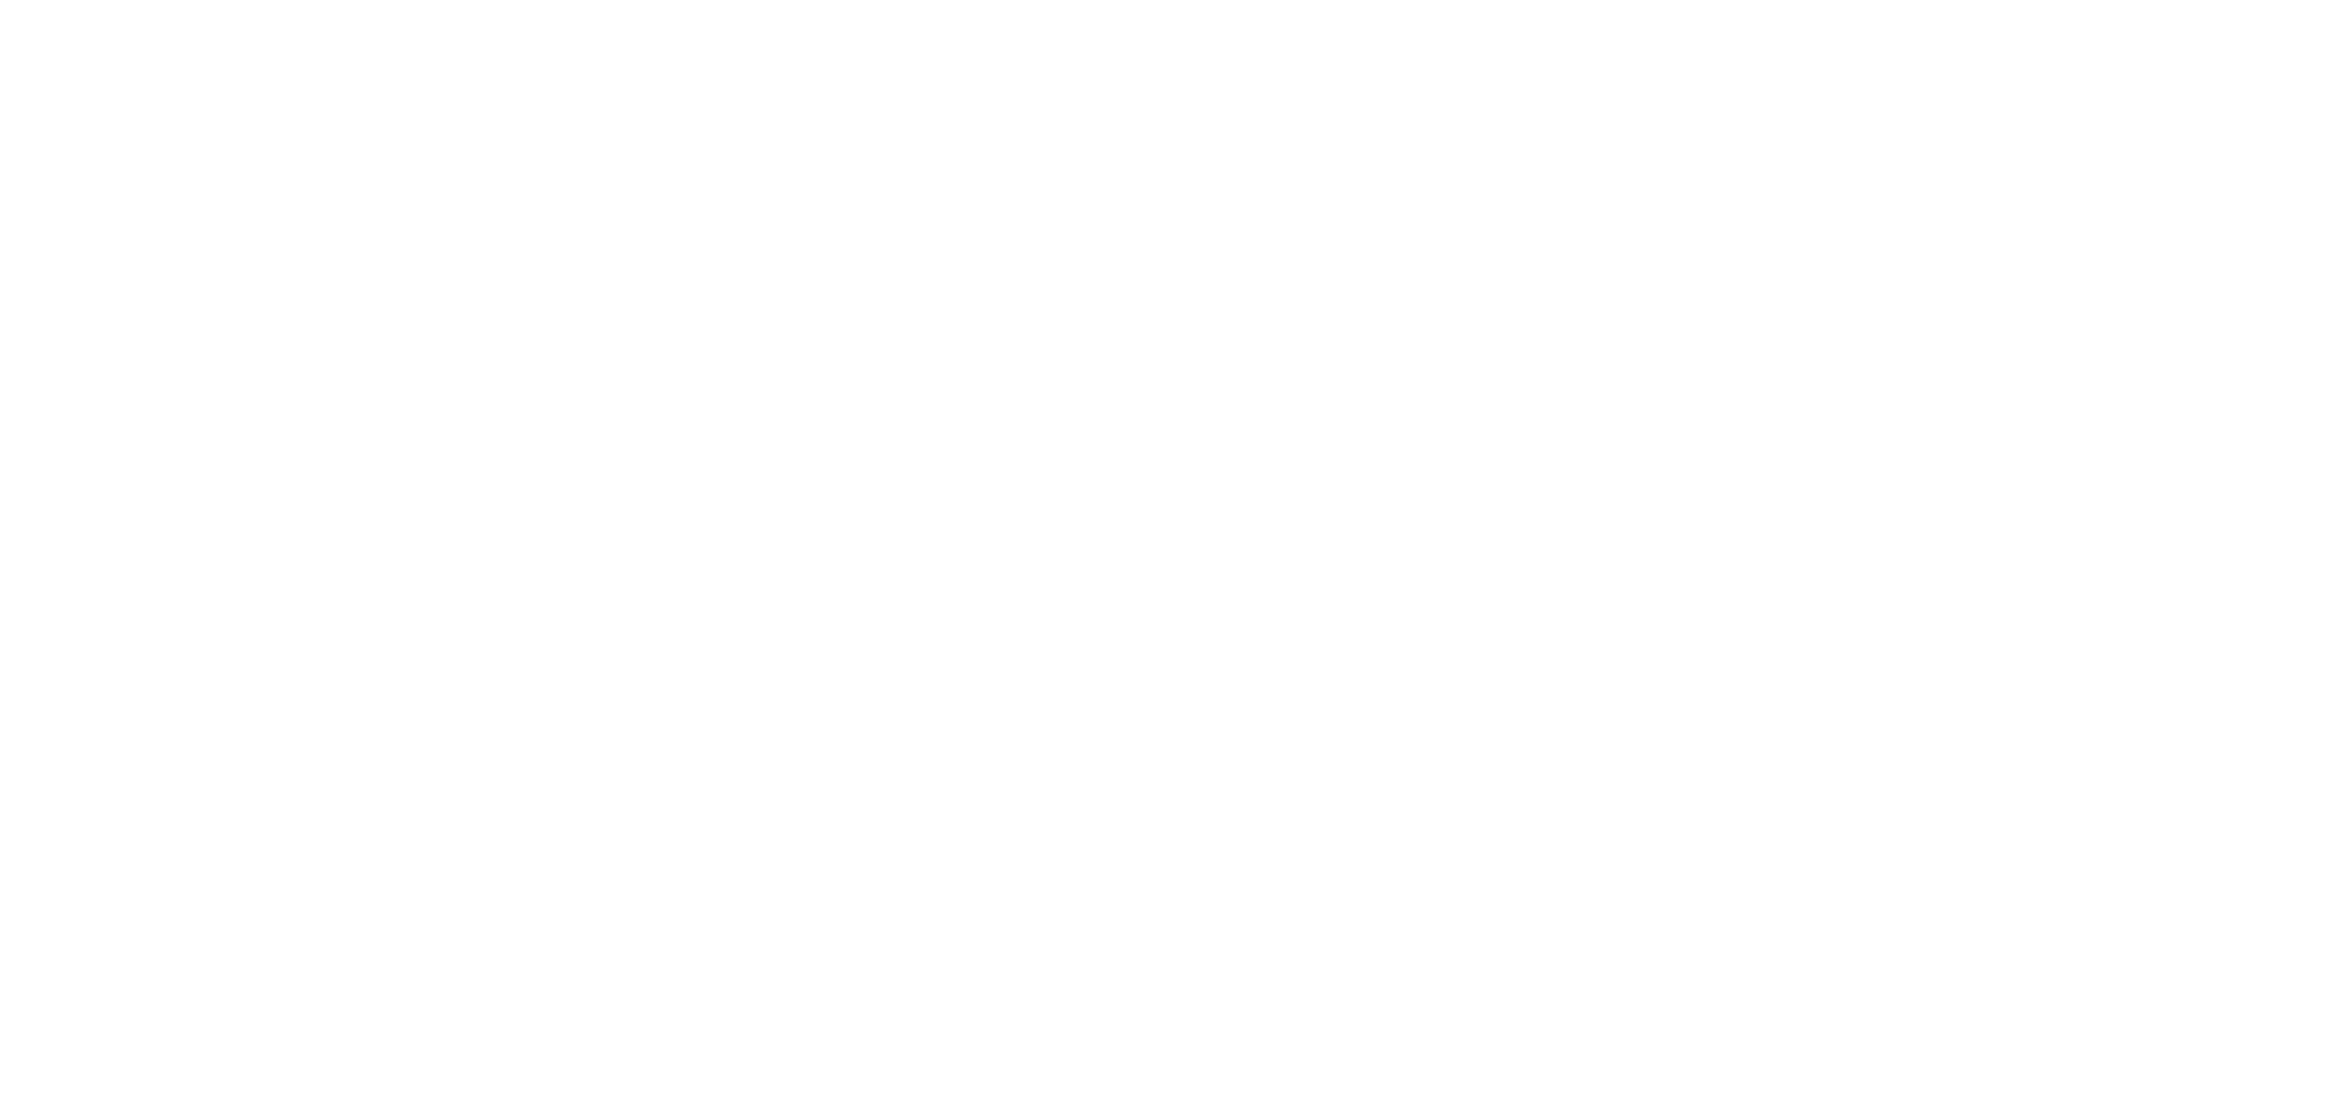 Download Barbie Logo Black And White   Png Format Twitter Logo Pluspng.com  - Barbie, Transparent background PNG HD thumbnail